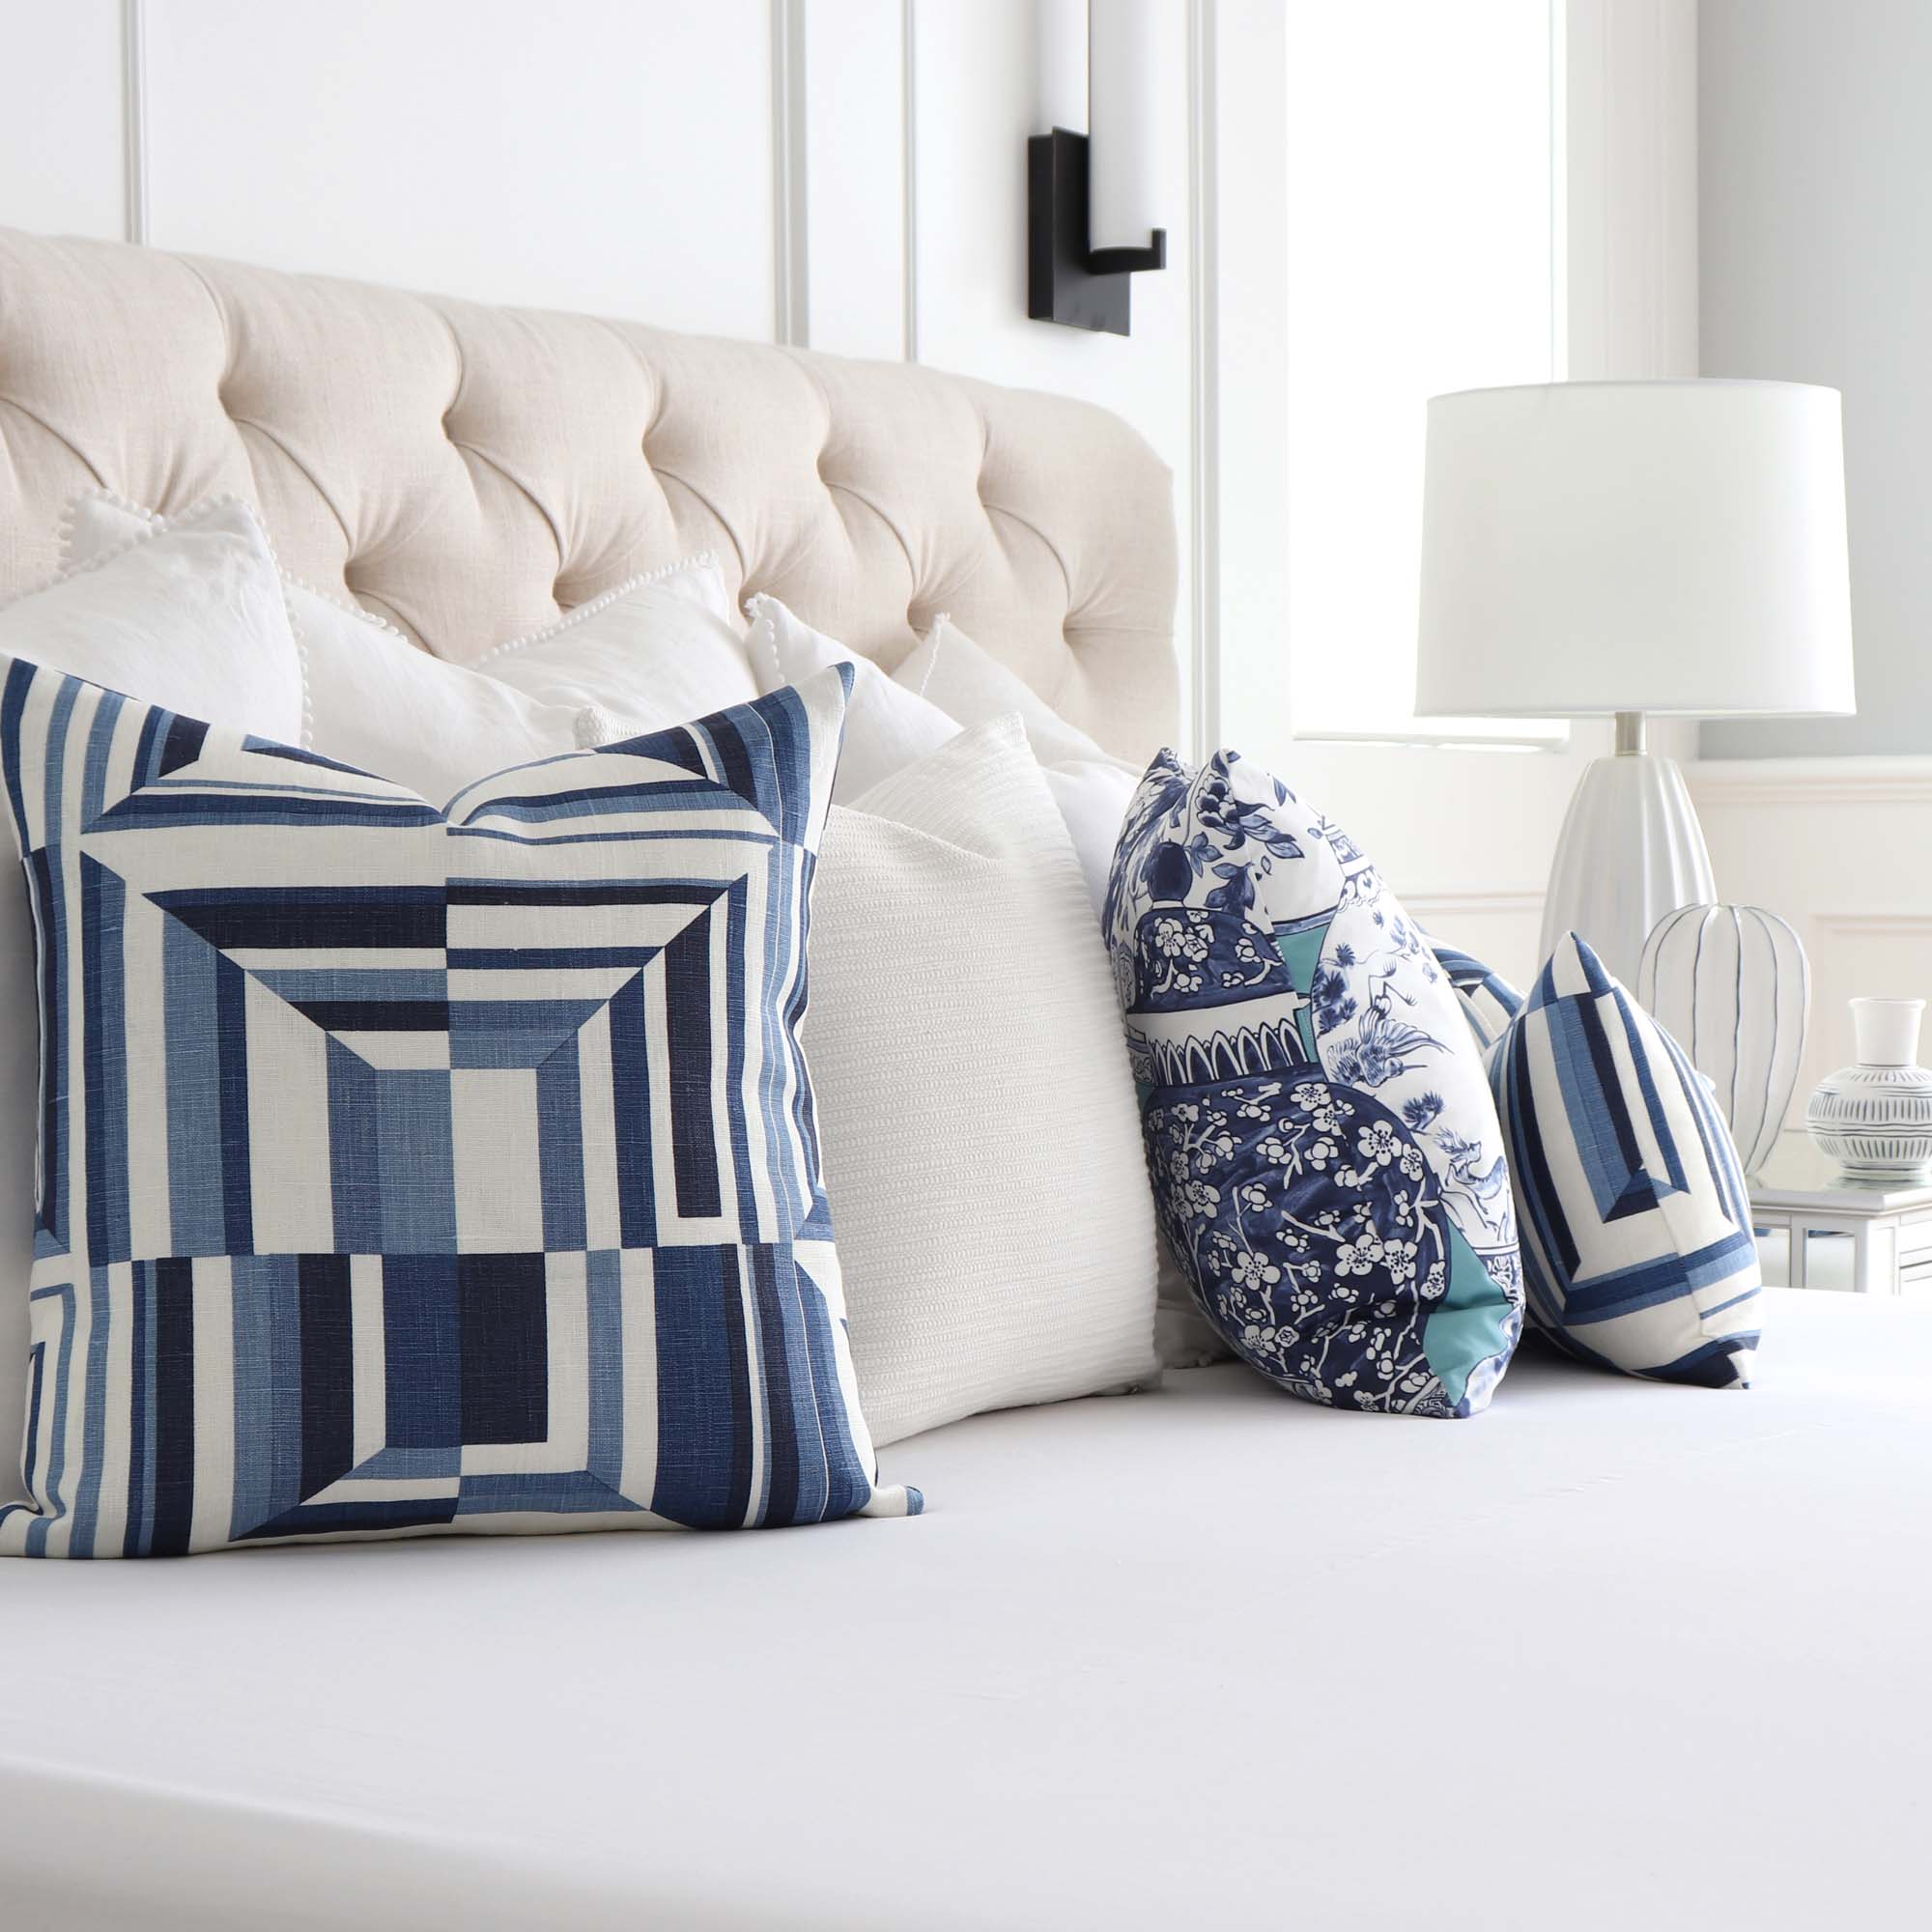 https://www.chloeandolive.com/cdn/shop/products/Thibaut-Cubism-Geometric-Blue-White-Stripes-Linen-Designer-Luxury-Decorative-Throw-Pillow-Cover-in-Bedroom-with-Matching-Pillows_2000x.jpg?v=1660332637